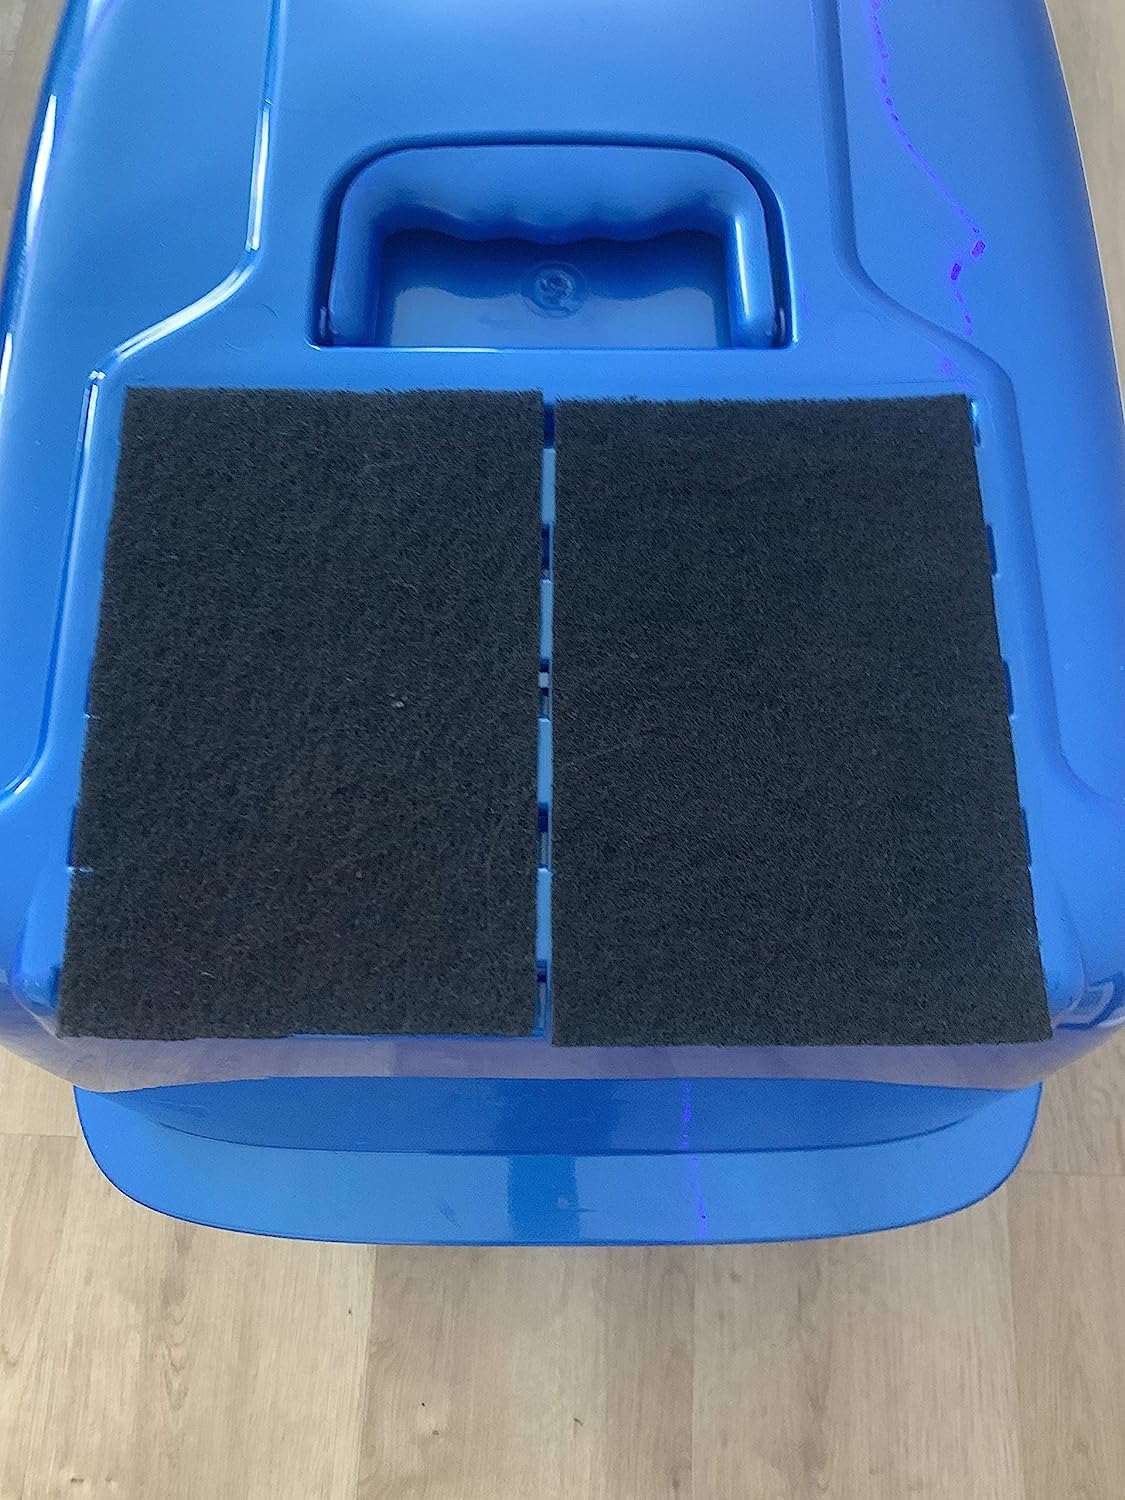 6-Pack Replacement Activated Charcoal Filters -Van Ness Cat Litter Box